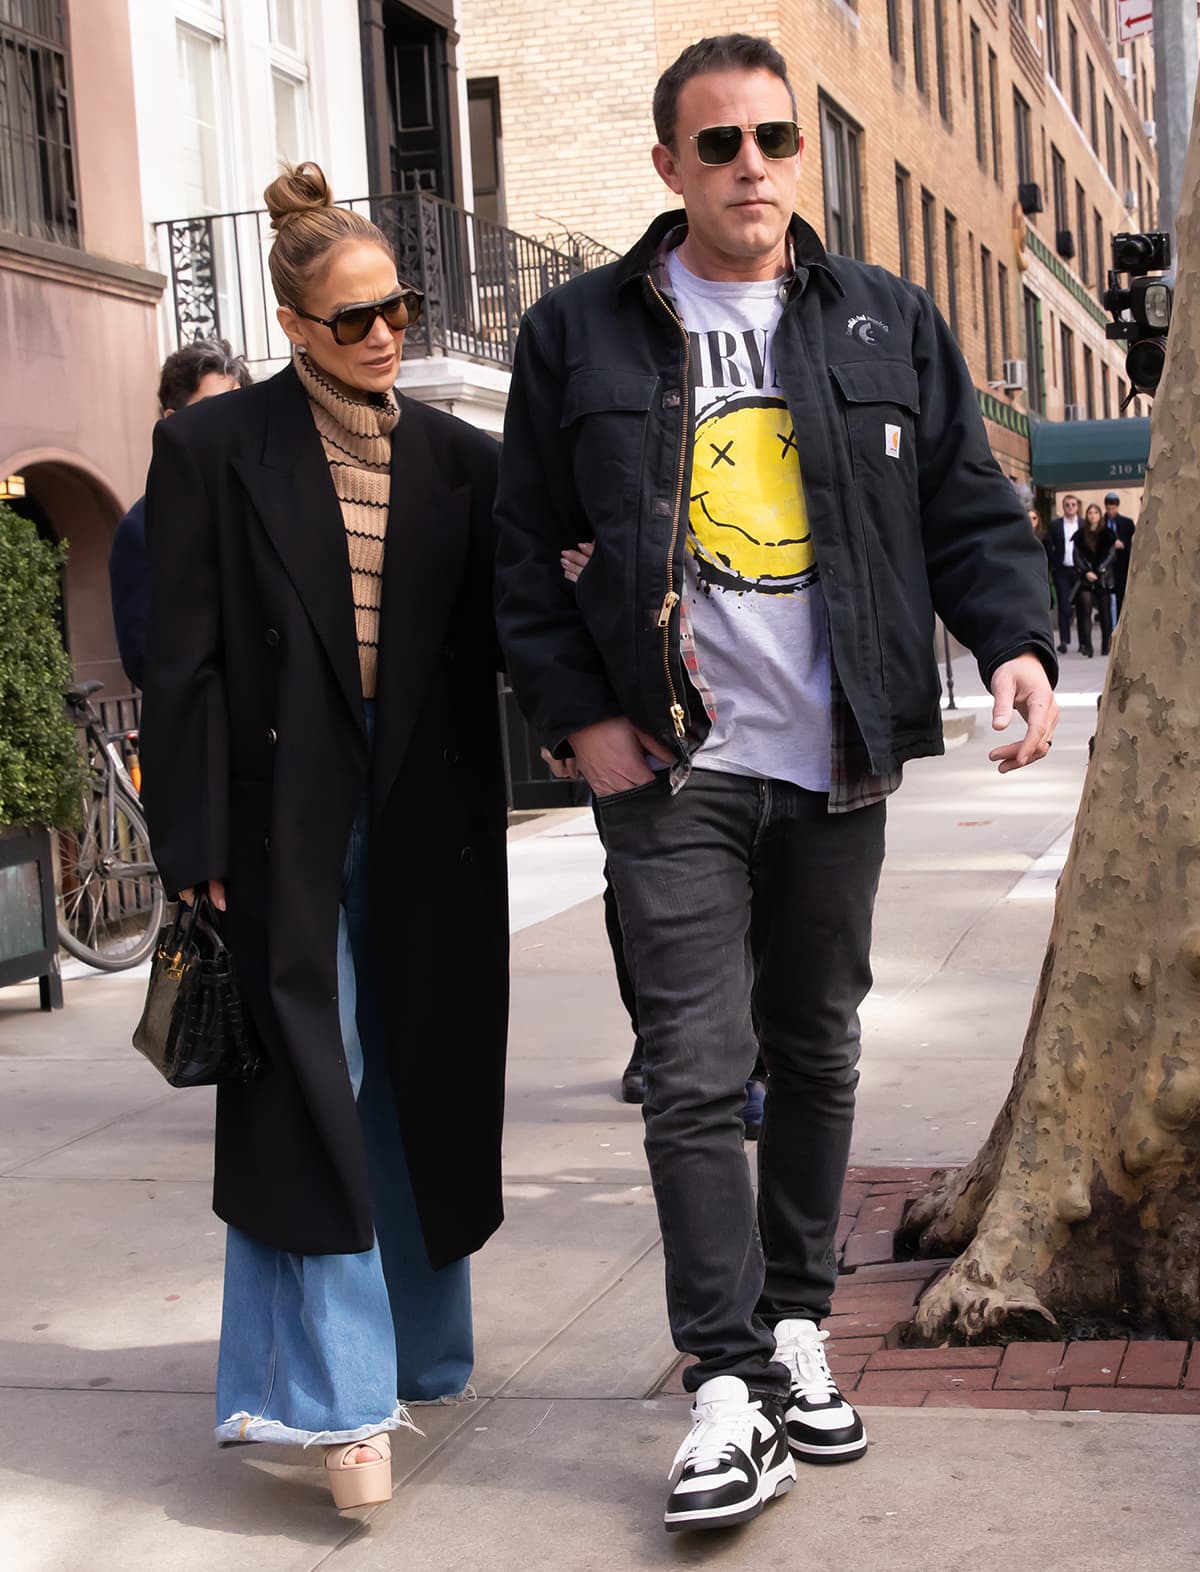 Jennifer Lopez opts for towering platform heels while Ben Affleck keeps it comfy in black-and-white shoes for their house-hunting trip